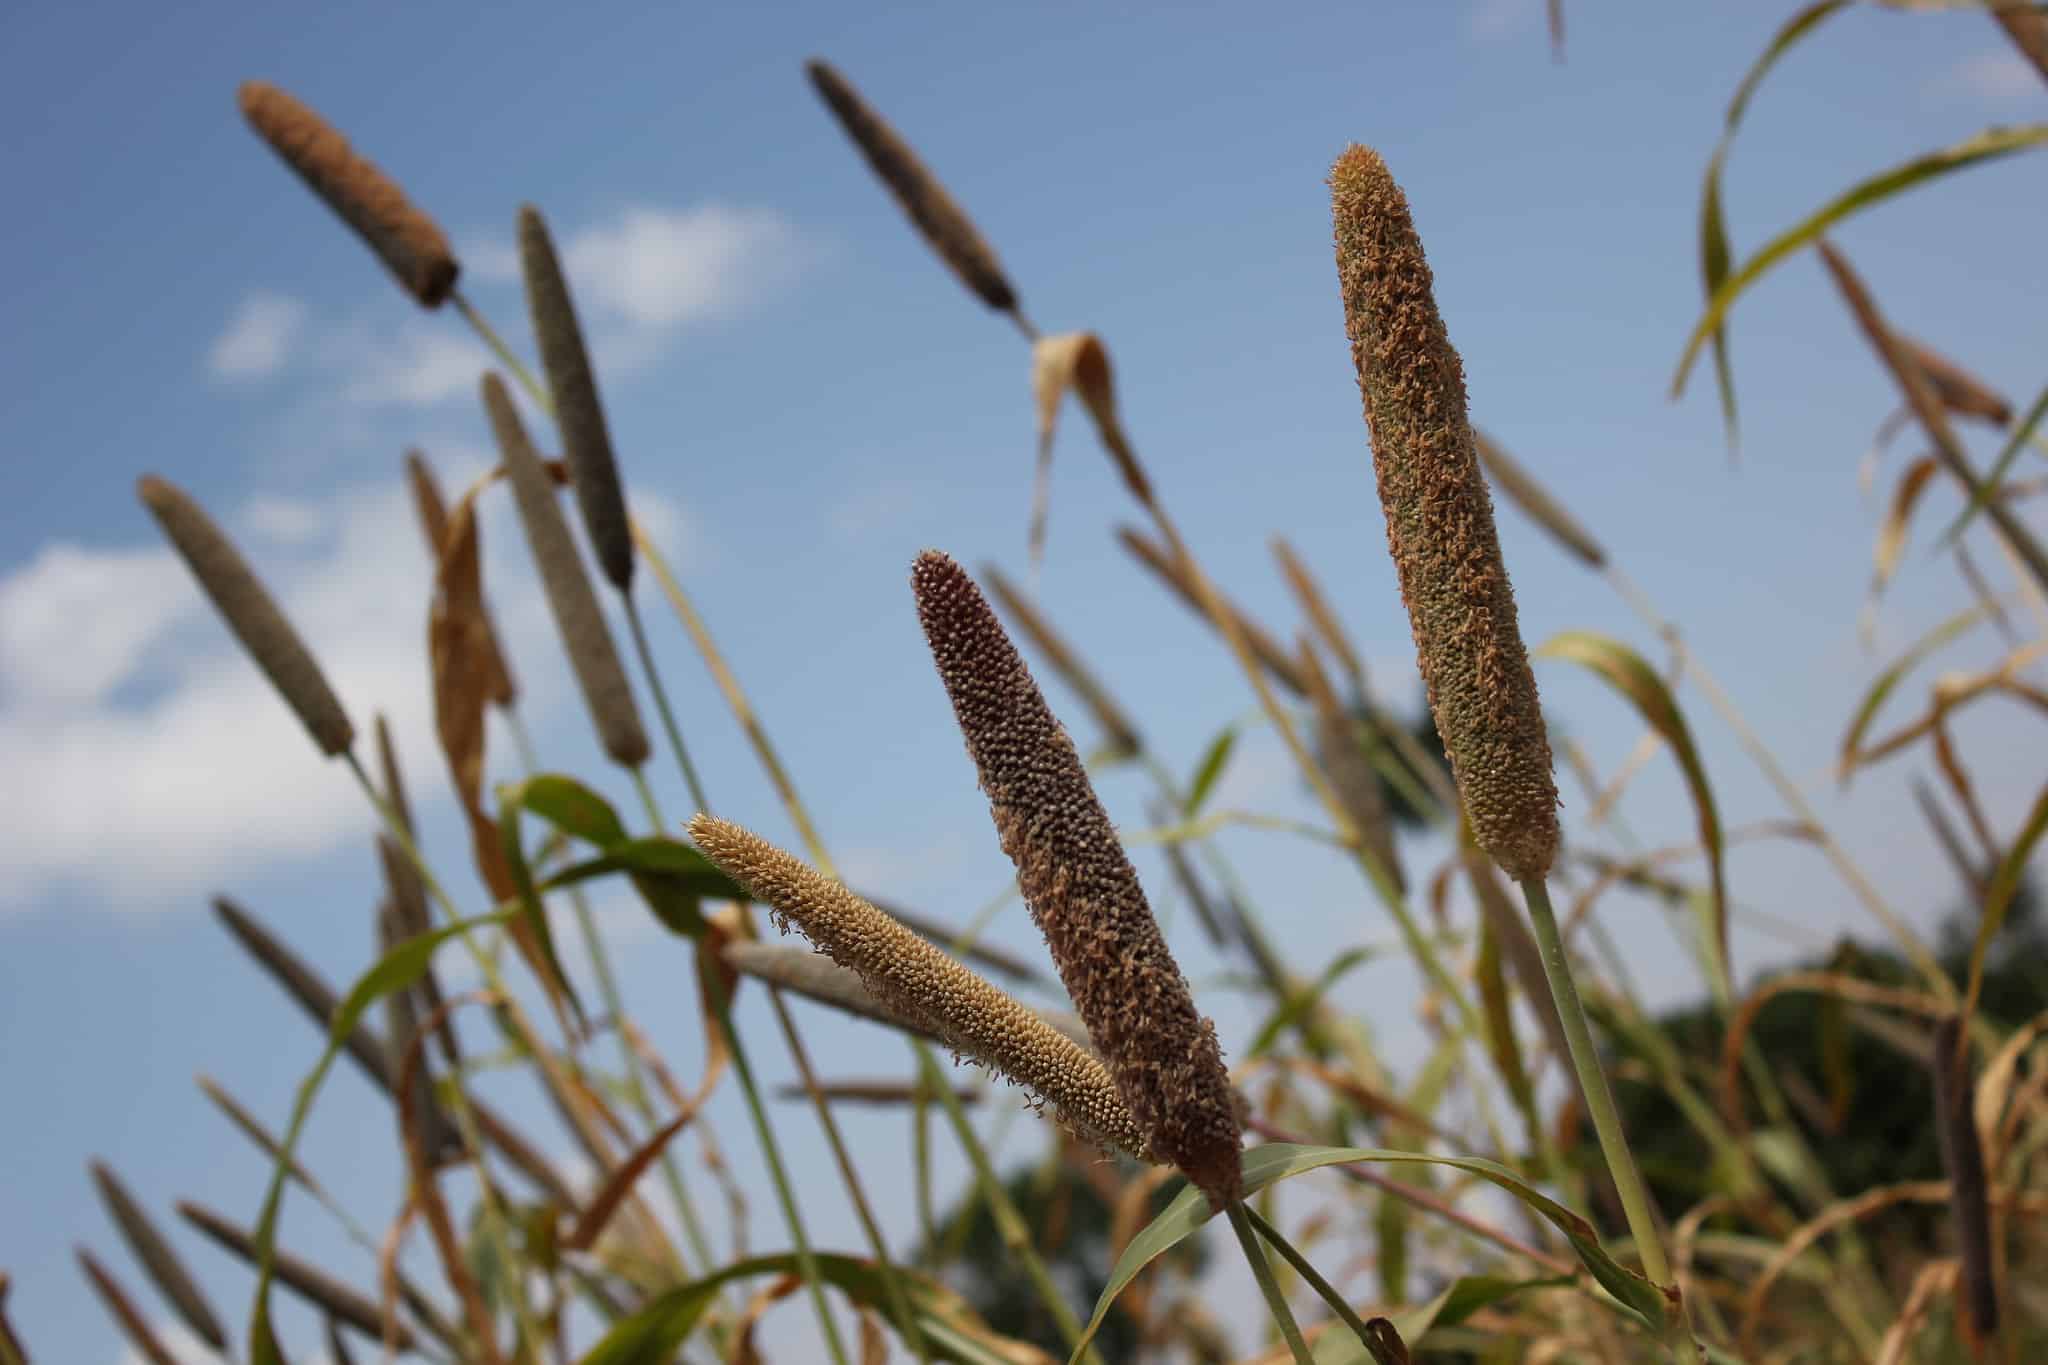 ICRISAT is finding new, innovative ways to re-popularize millets and sorghum, traditional, nutritious, and drought-friendly crops, in the semi-arid tropics.